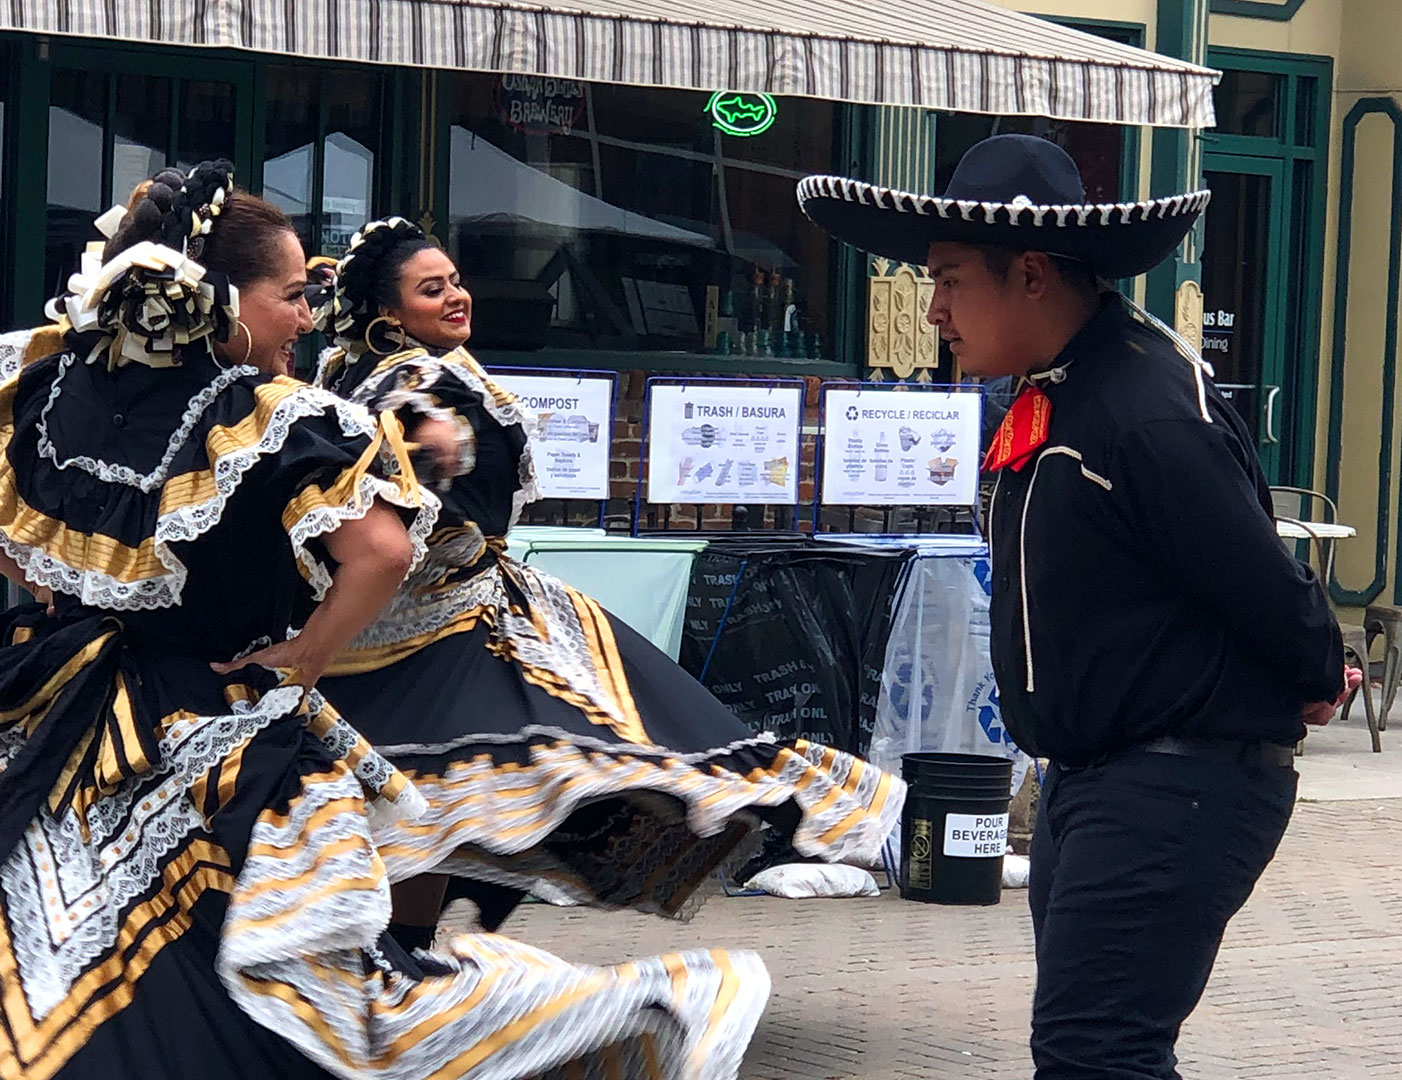 Dancers in traditional Mexican costumes perform on a street with recycling and compost bins in the background